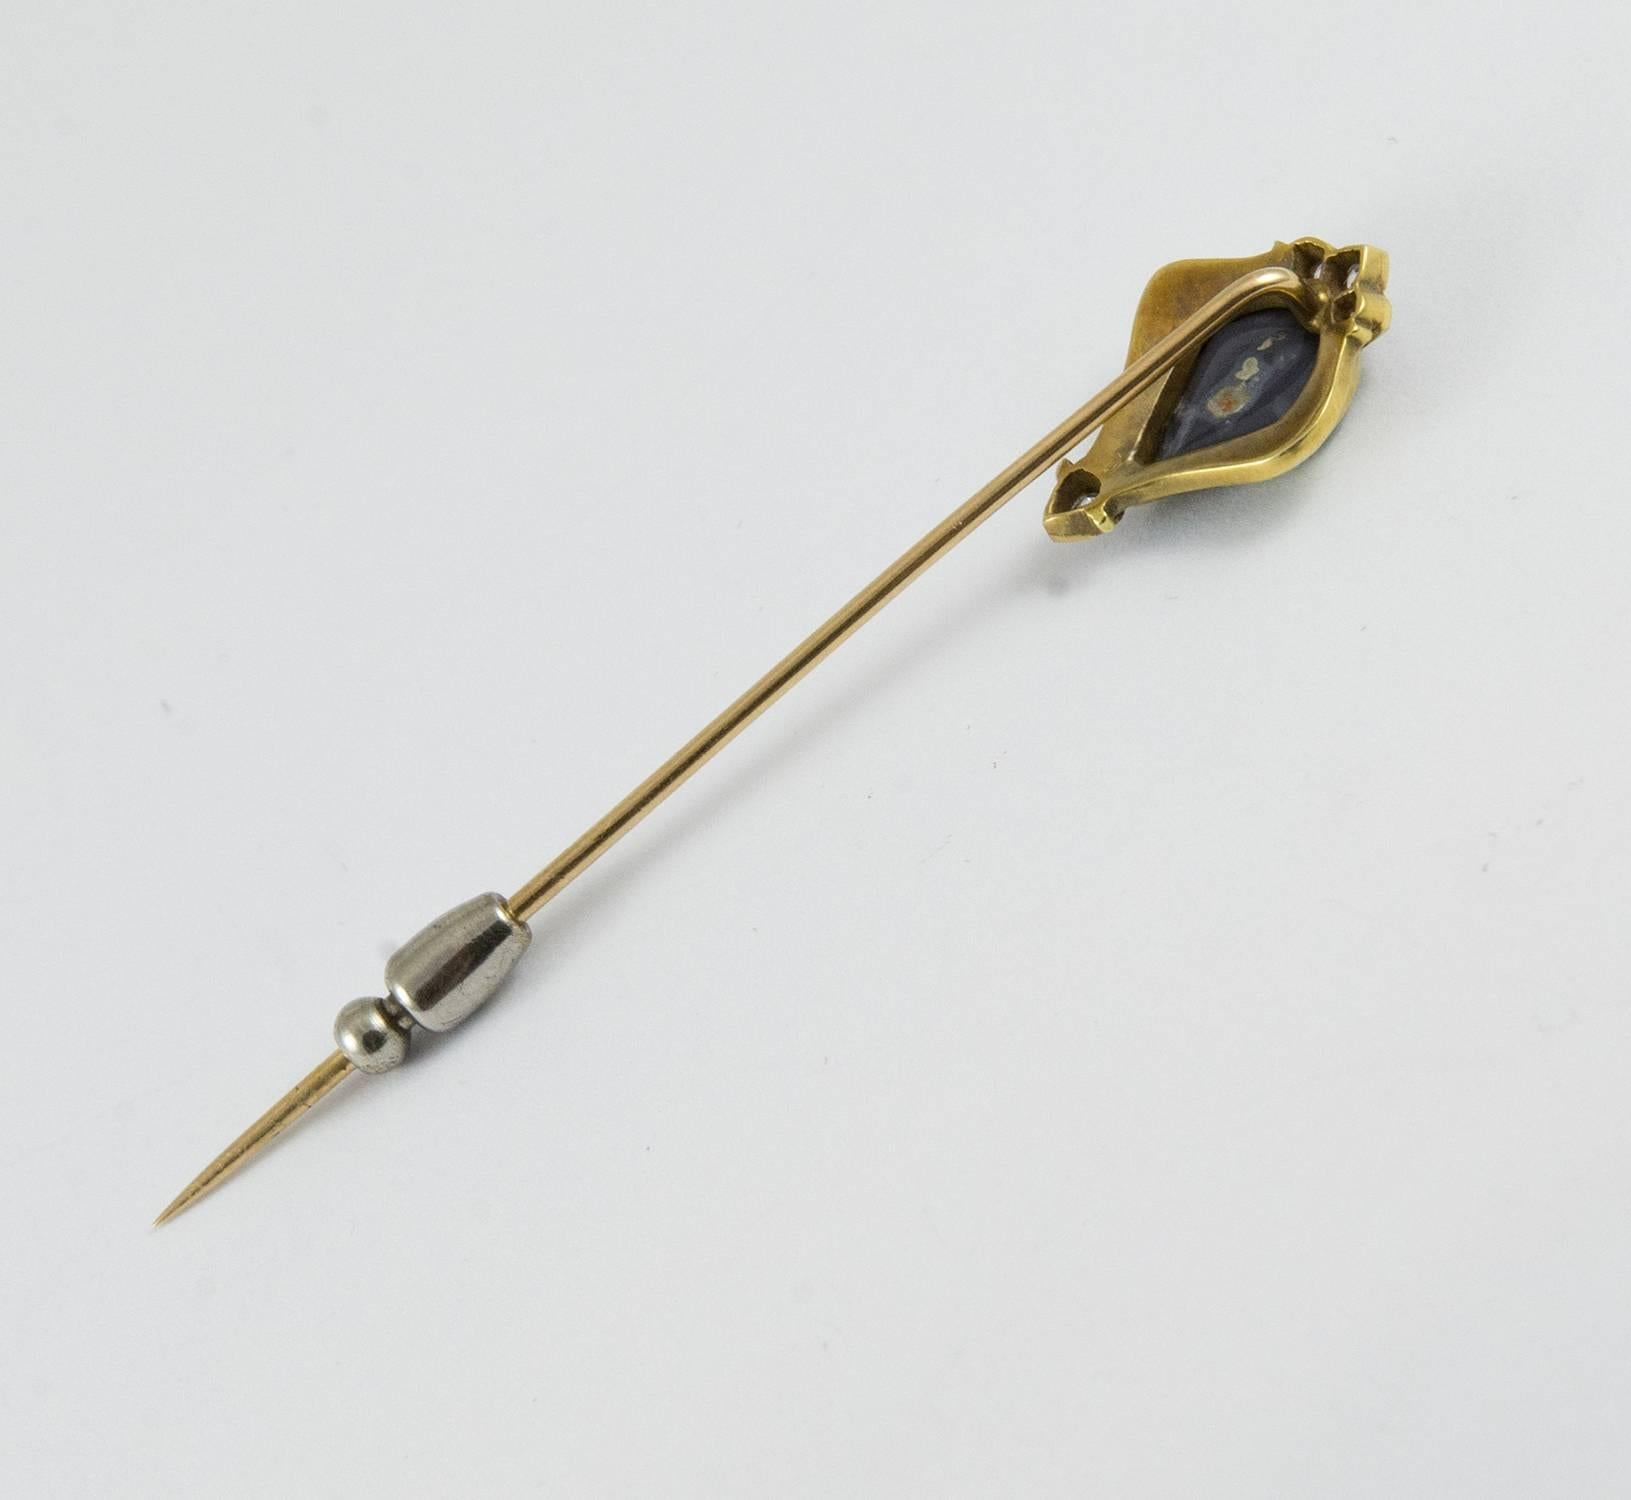 A stunning Art Nouveau stick pin made Circa 1915. It holds a beautiful 1.65 ct. cabochon black opal with strong play of colour. There are four old European cut diamonds which are bead set above and below the central gem.The entire opal is framed in